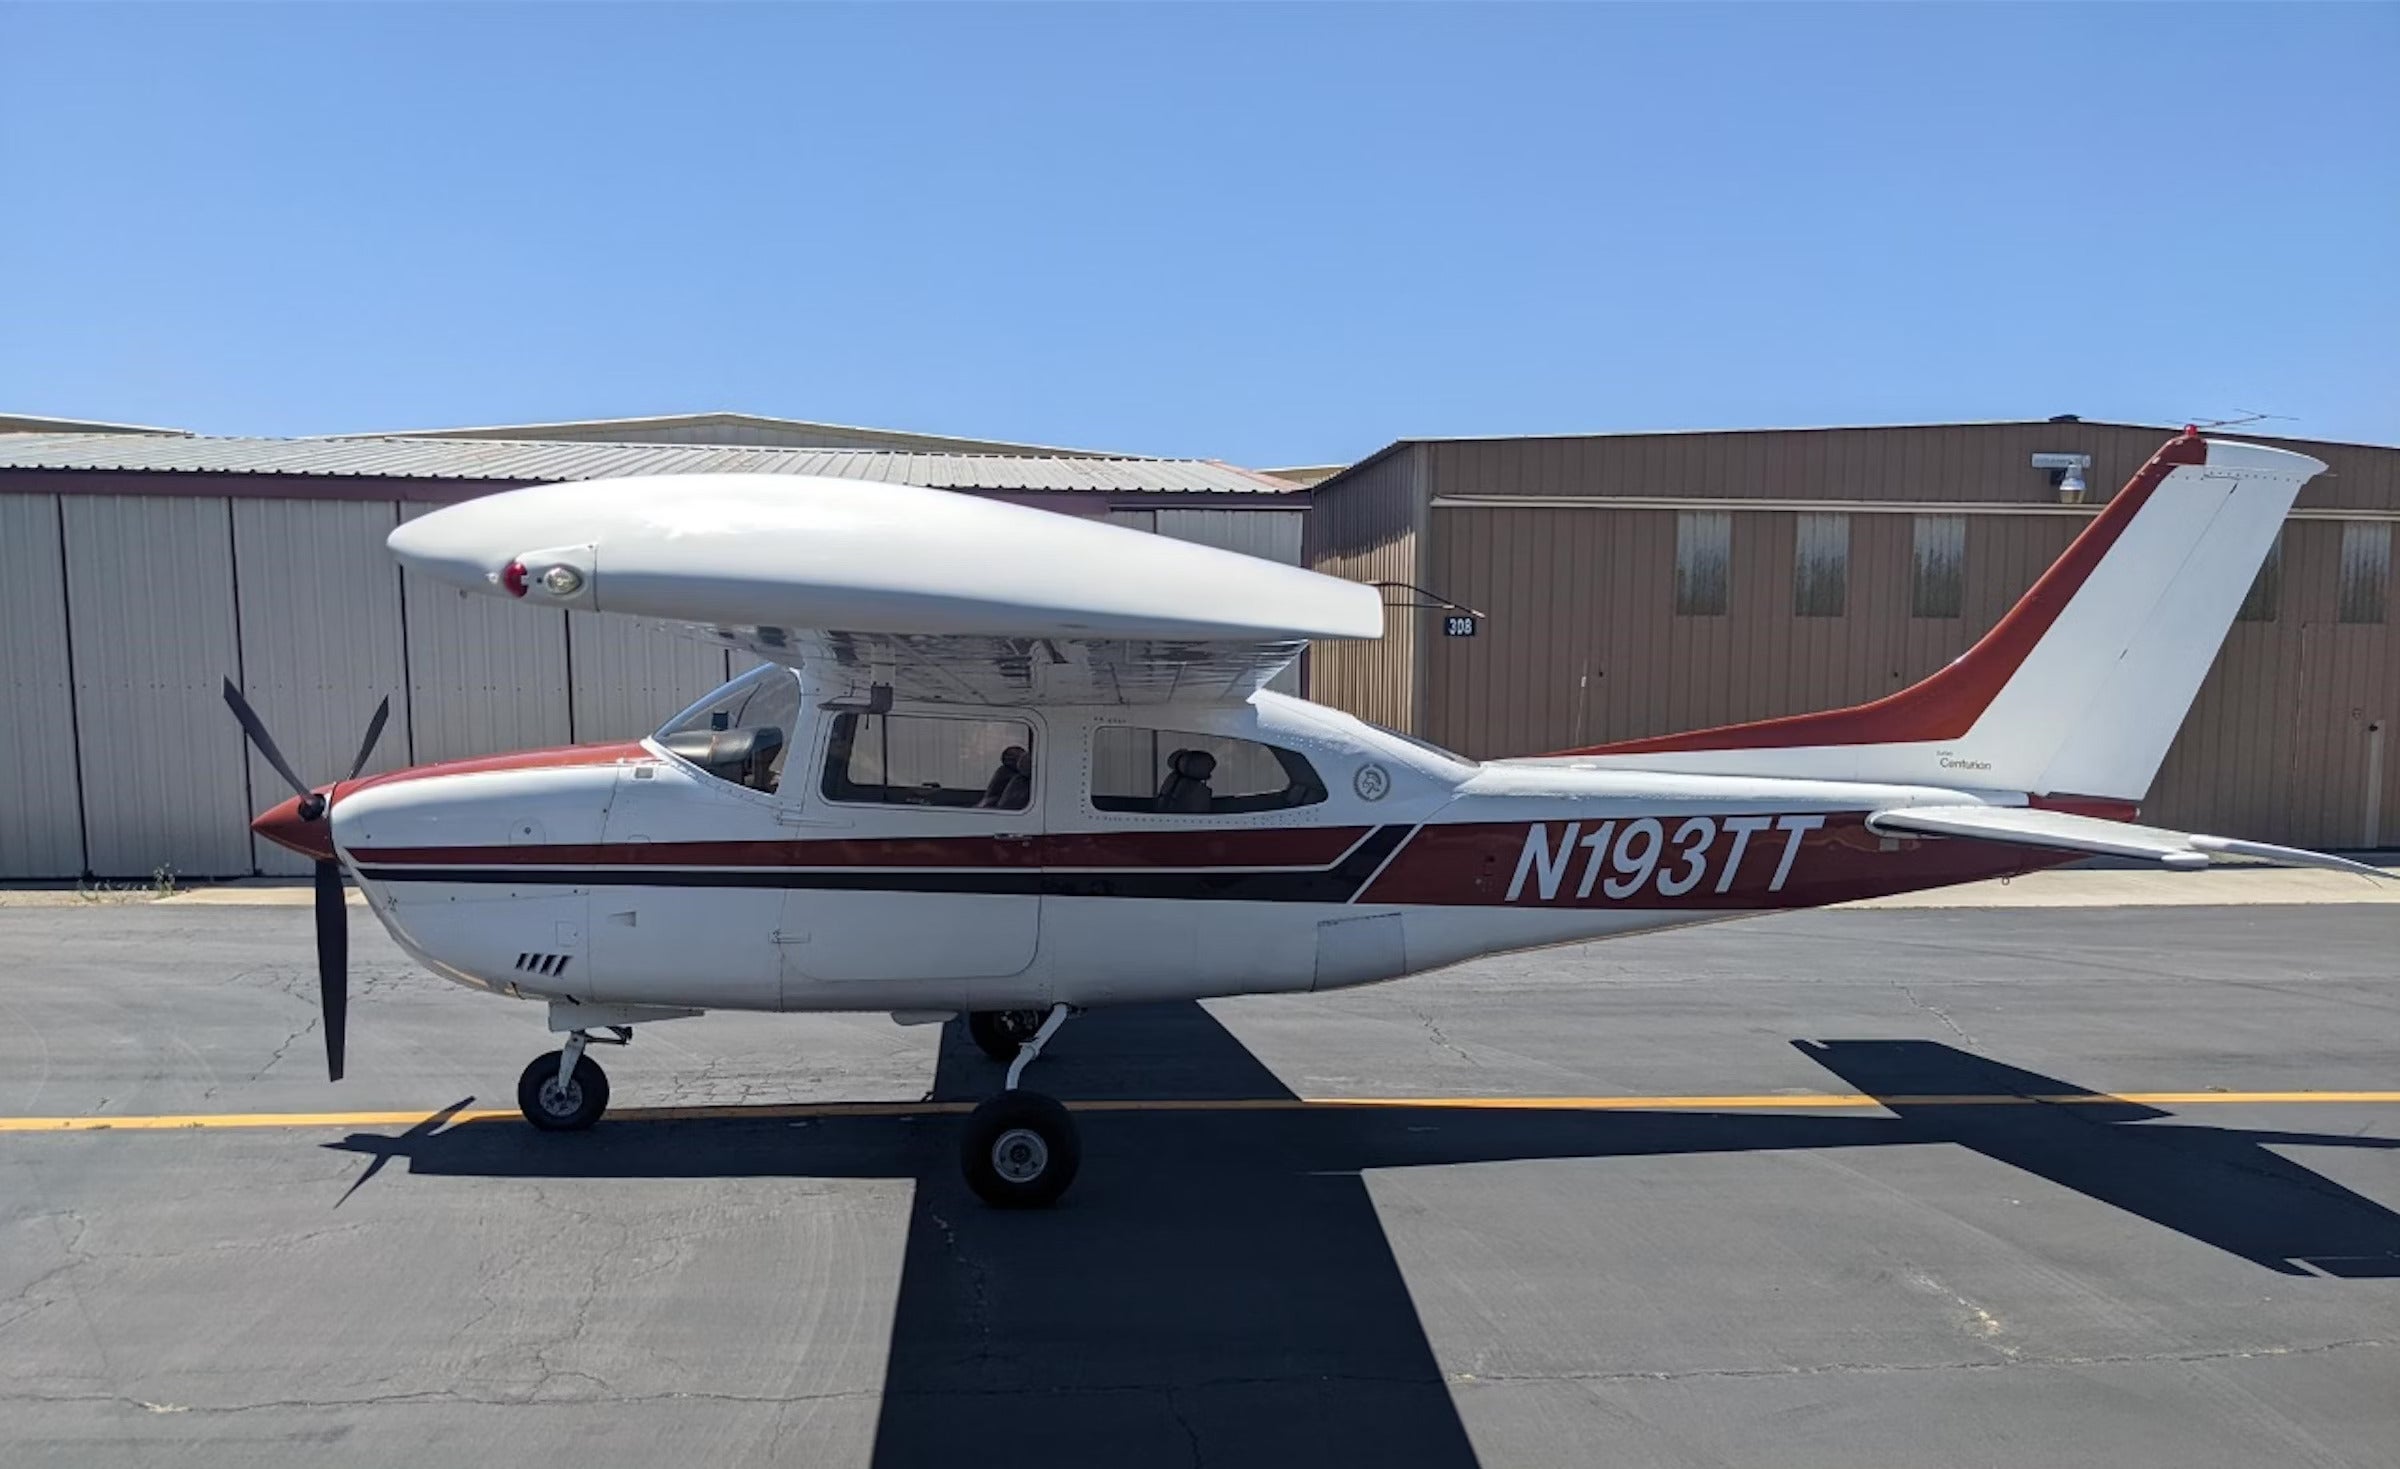 This 1977 Cessna T210 Centurion Is a Fast, Heavy-Lifting ‘AircraftForSale’ Top Pick